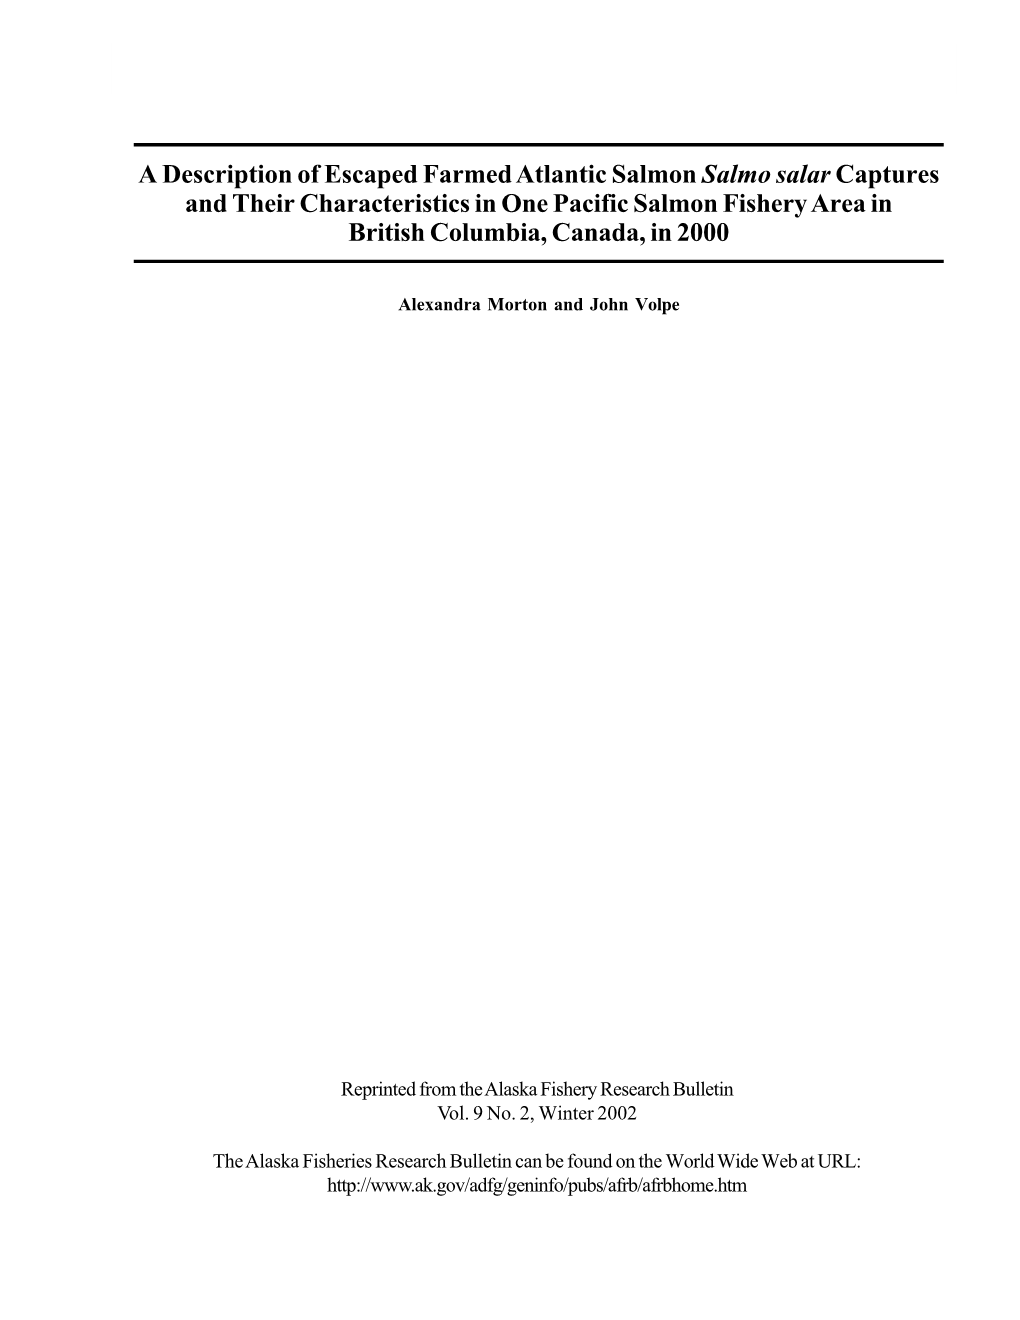 A Description of Escaped Farmed Atlantic Salmon Salmo Salar Captures and Their Characteristics in One Pacific Salmon Fishery Area in British Columbia, Canada, in 2000